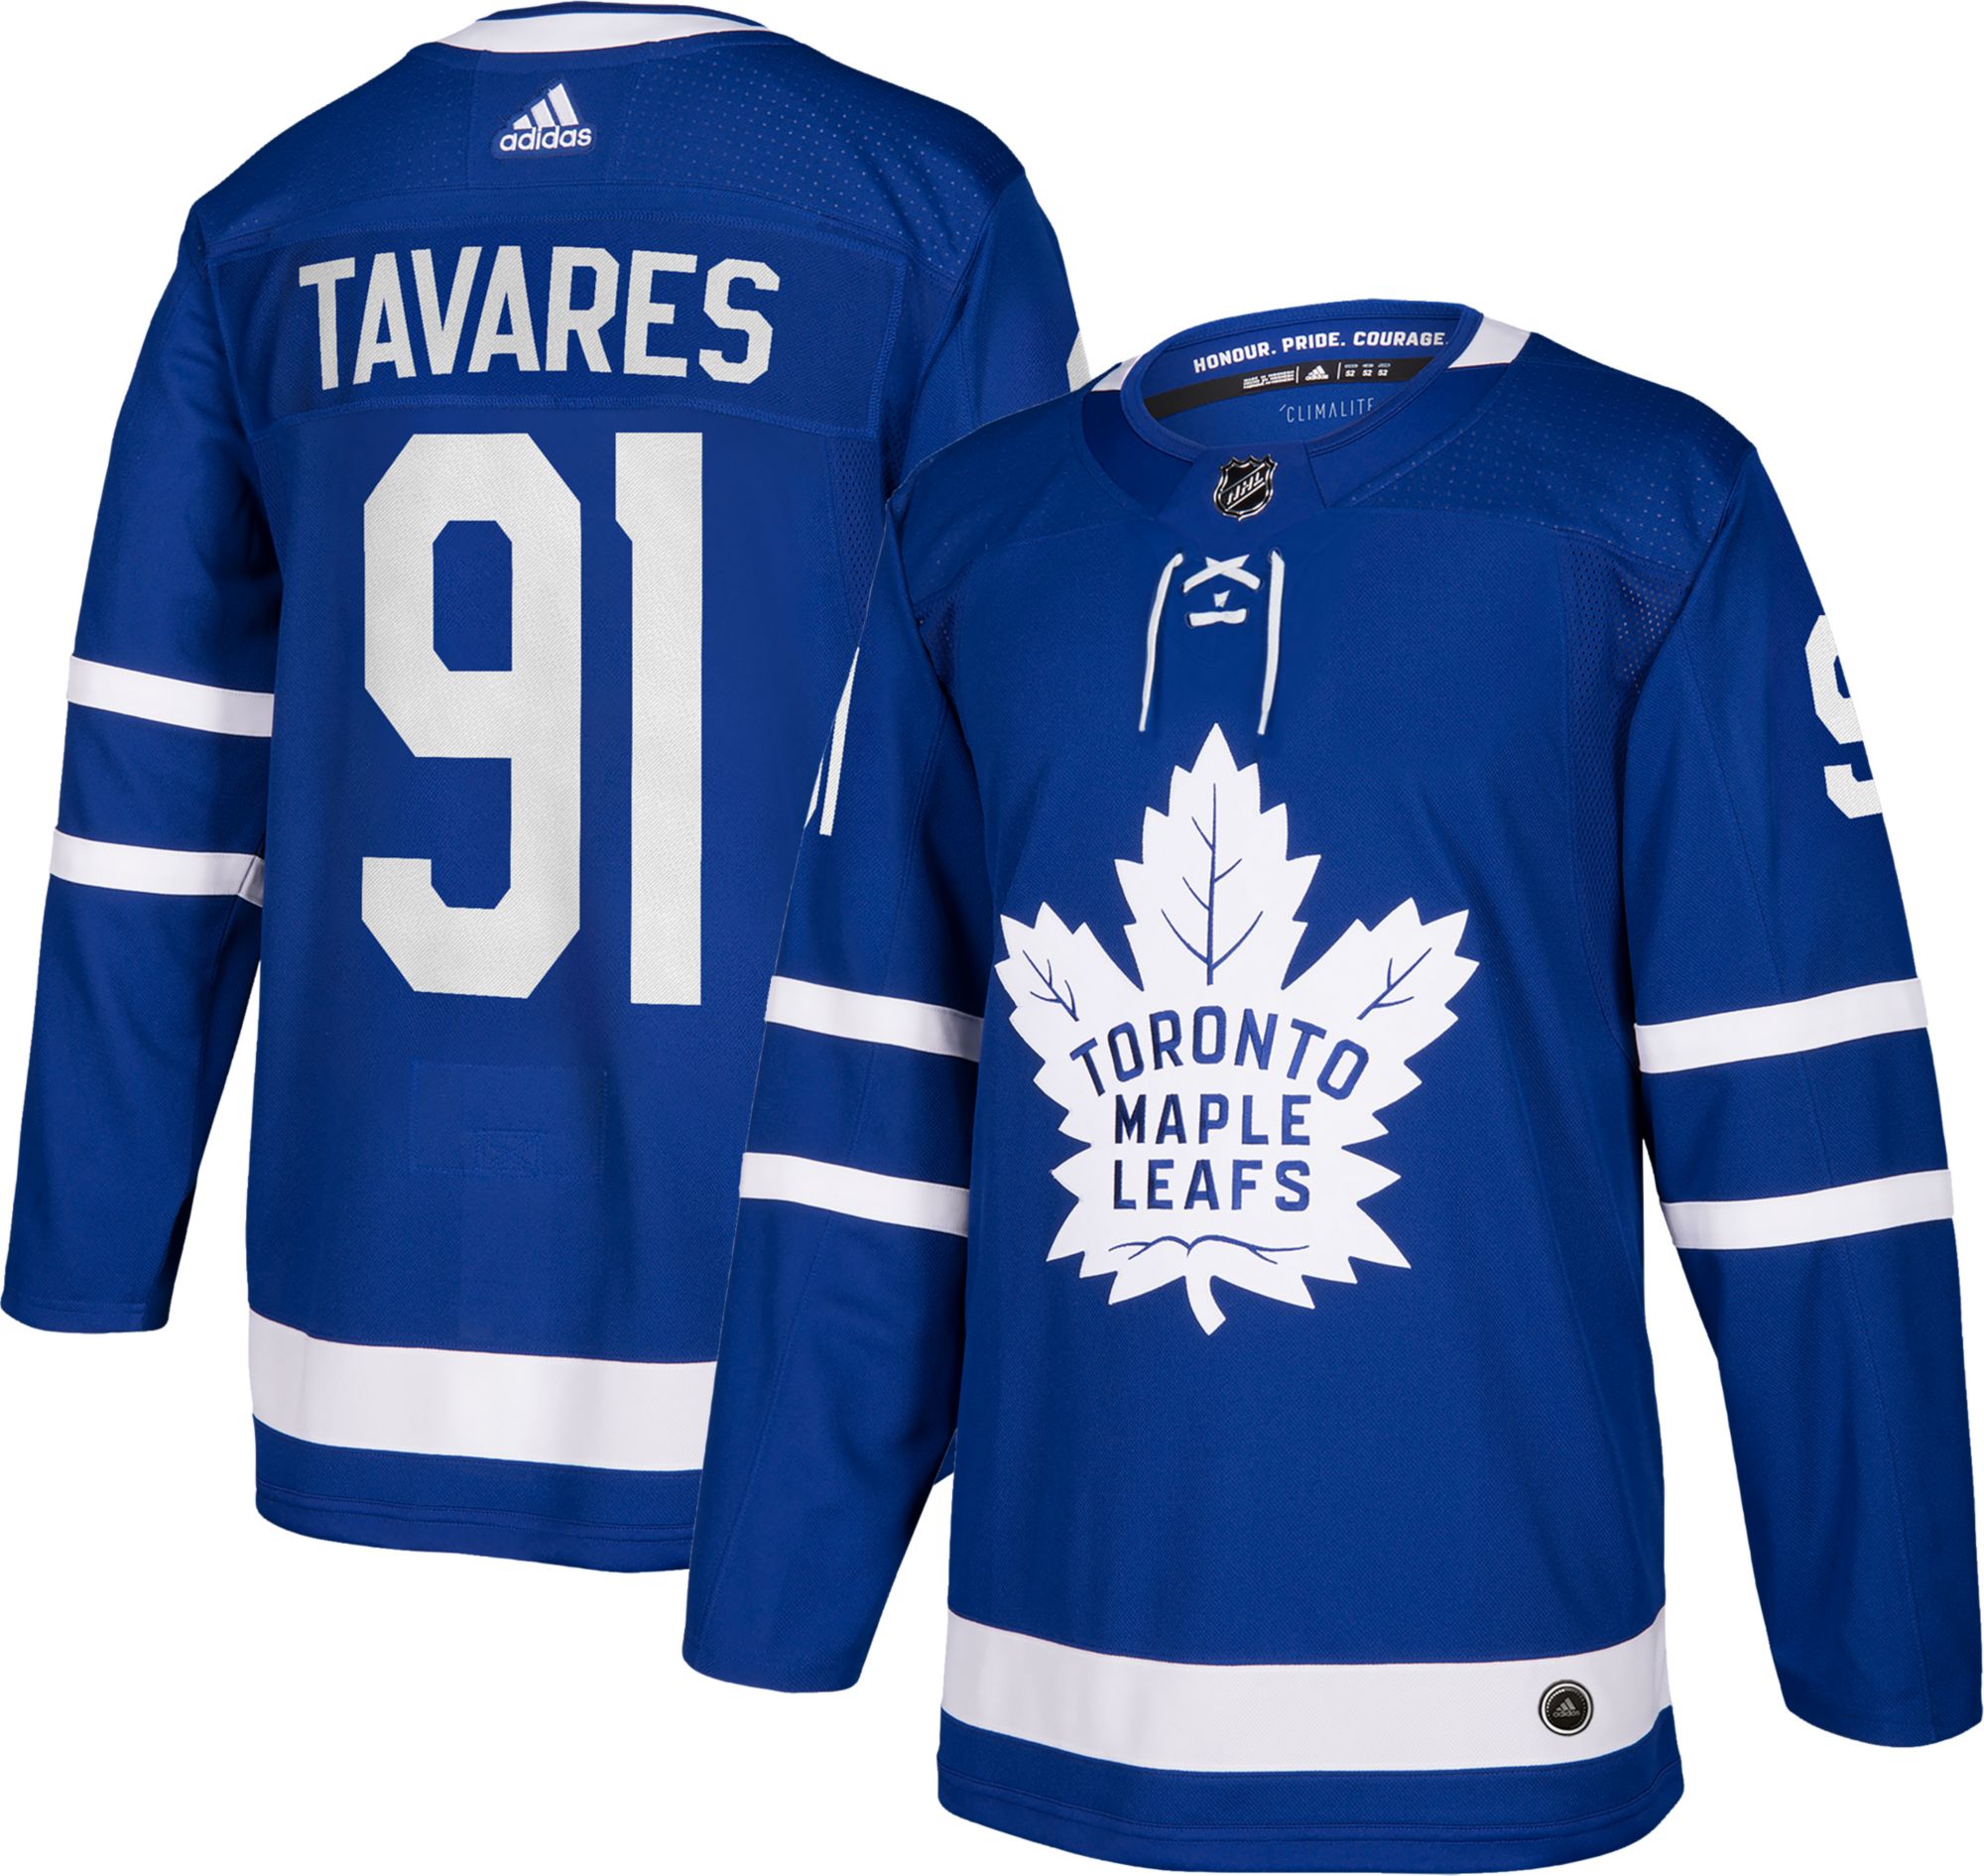 $250 Authentic Adidas Maple Leafs NHL Jersey VS $35 DHGate Knockoff 